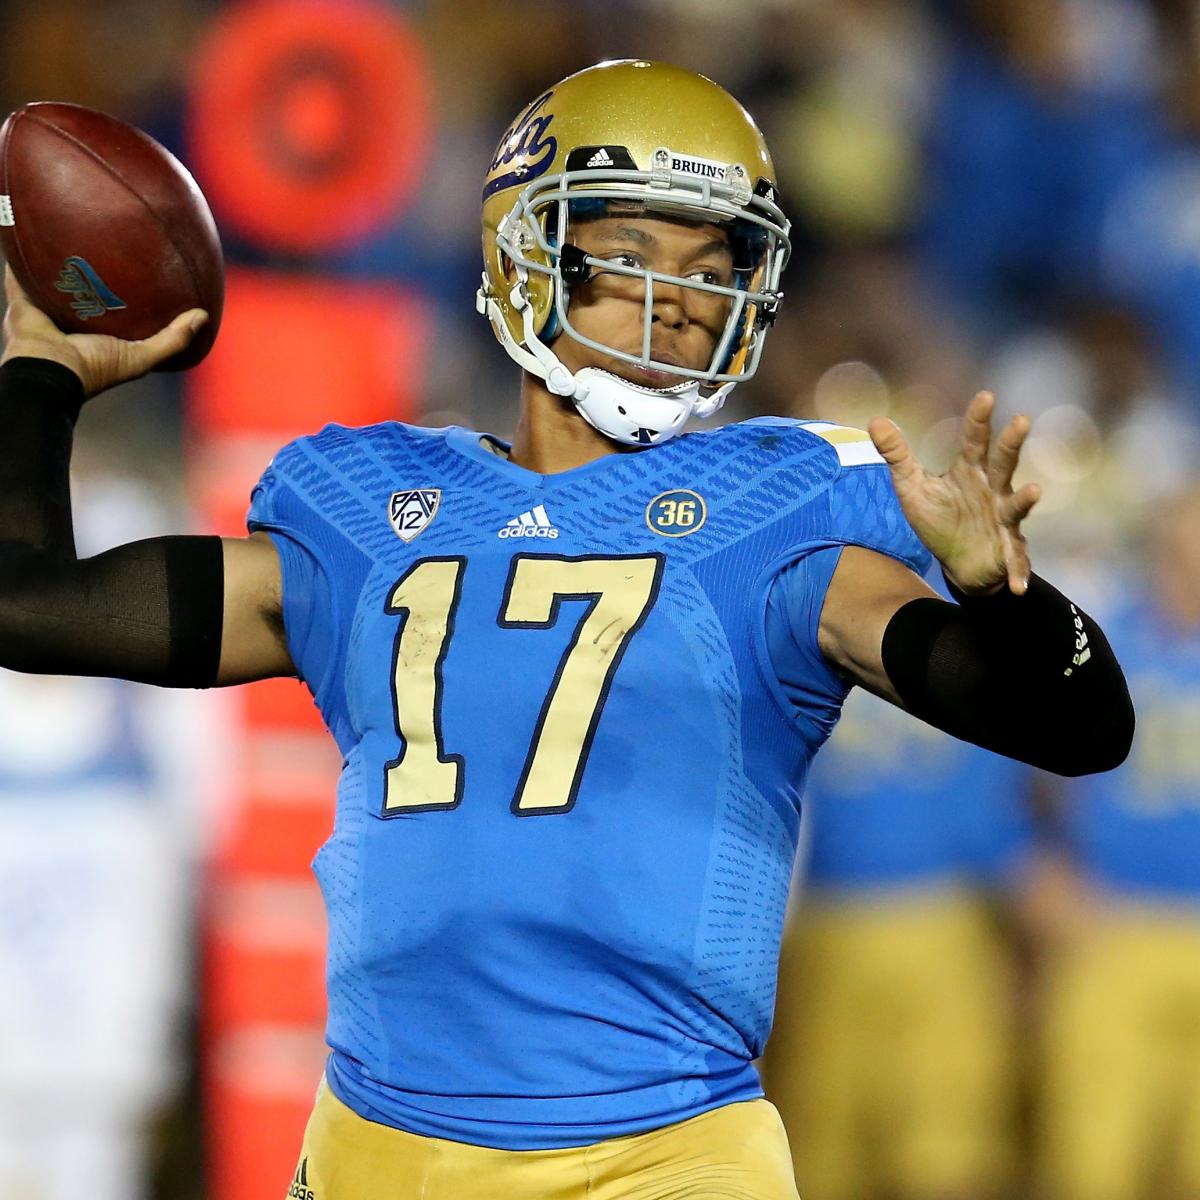 Sun Bowl Pros and Cons of UCLA QB Brett Hundley Declaring for the NFL